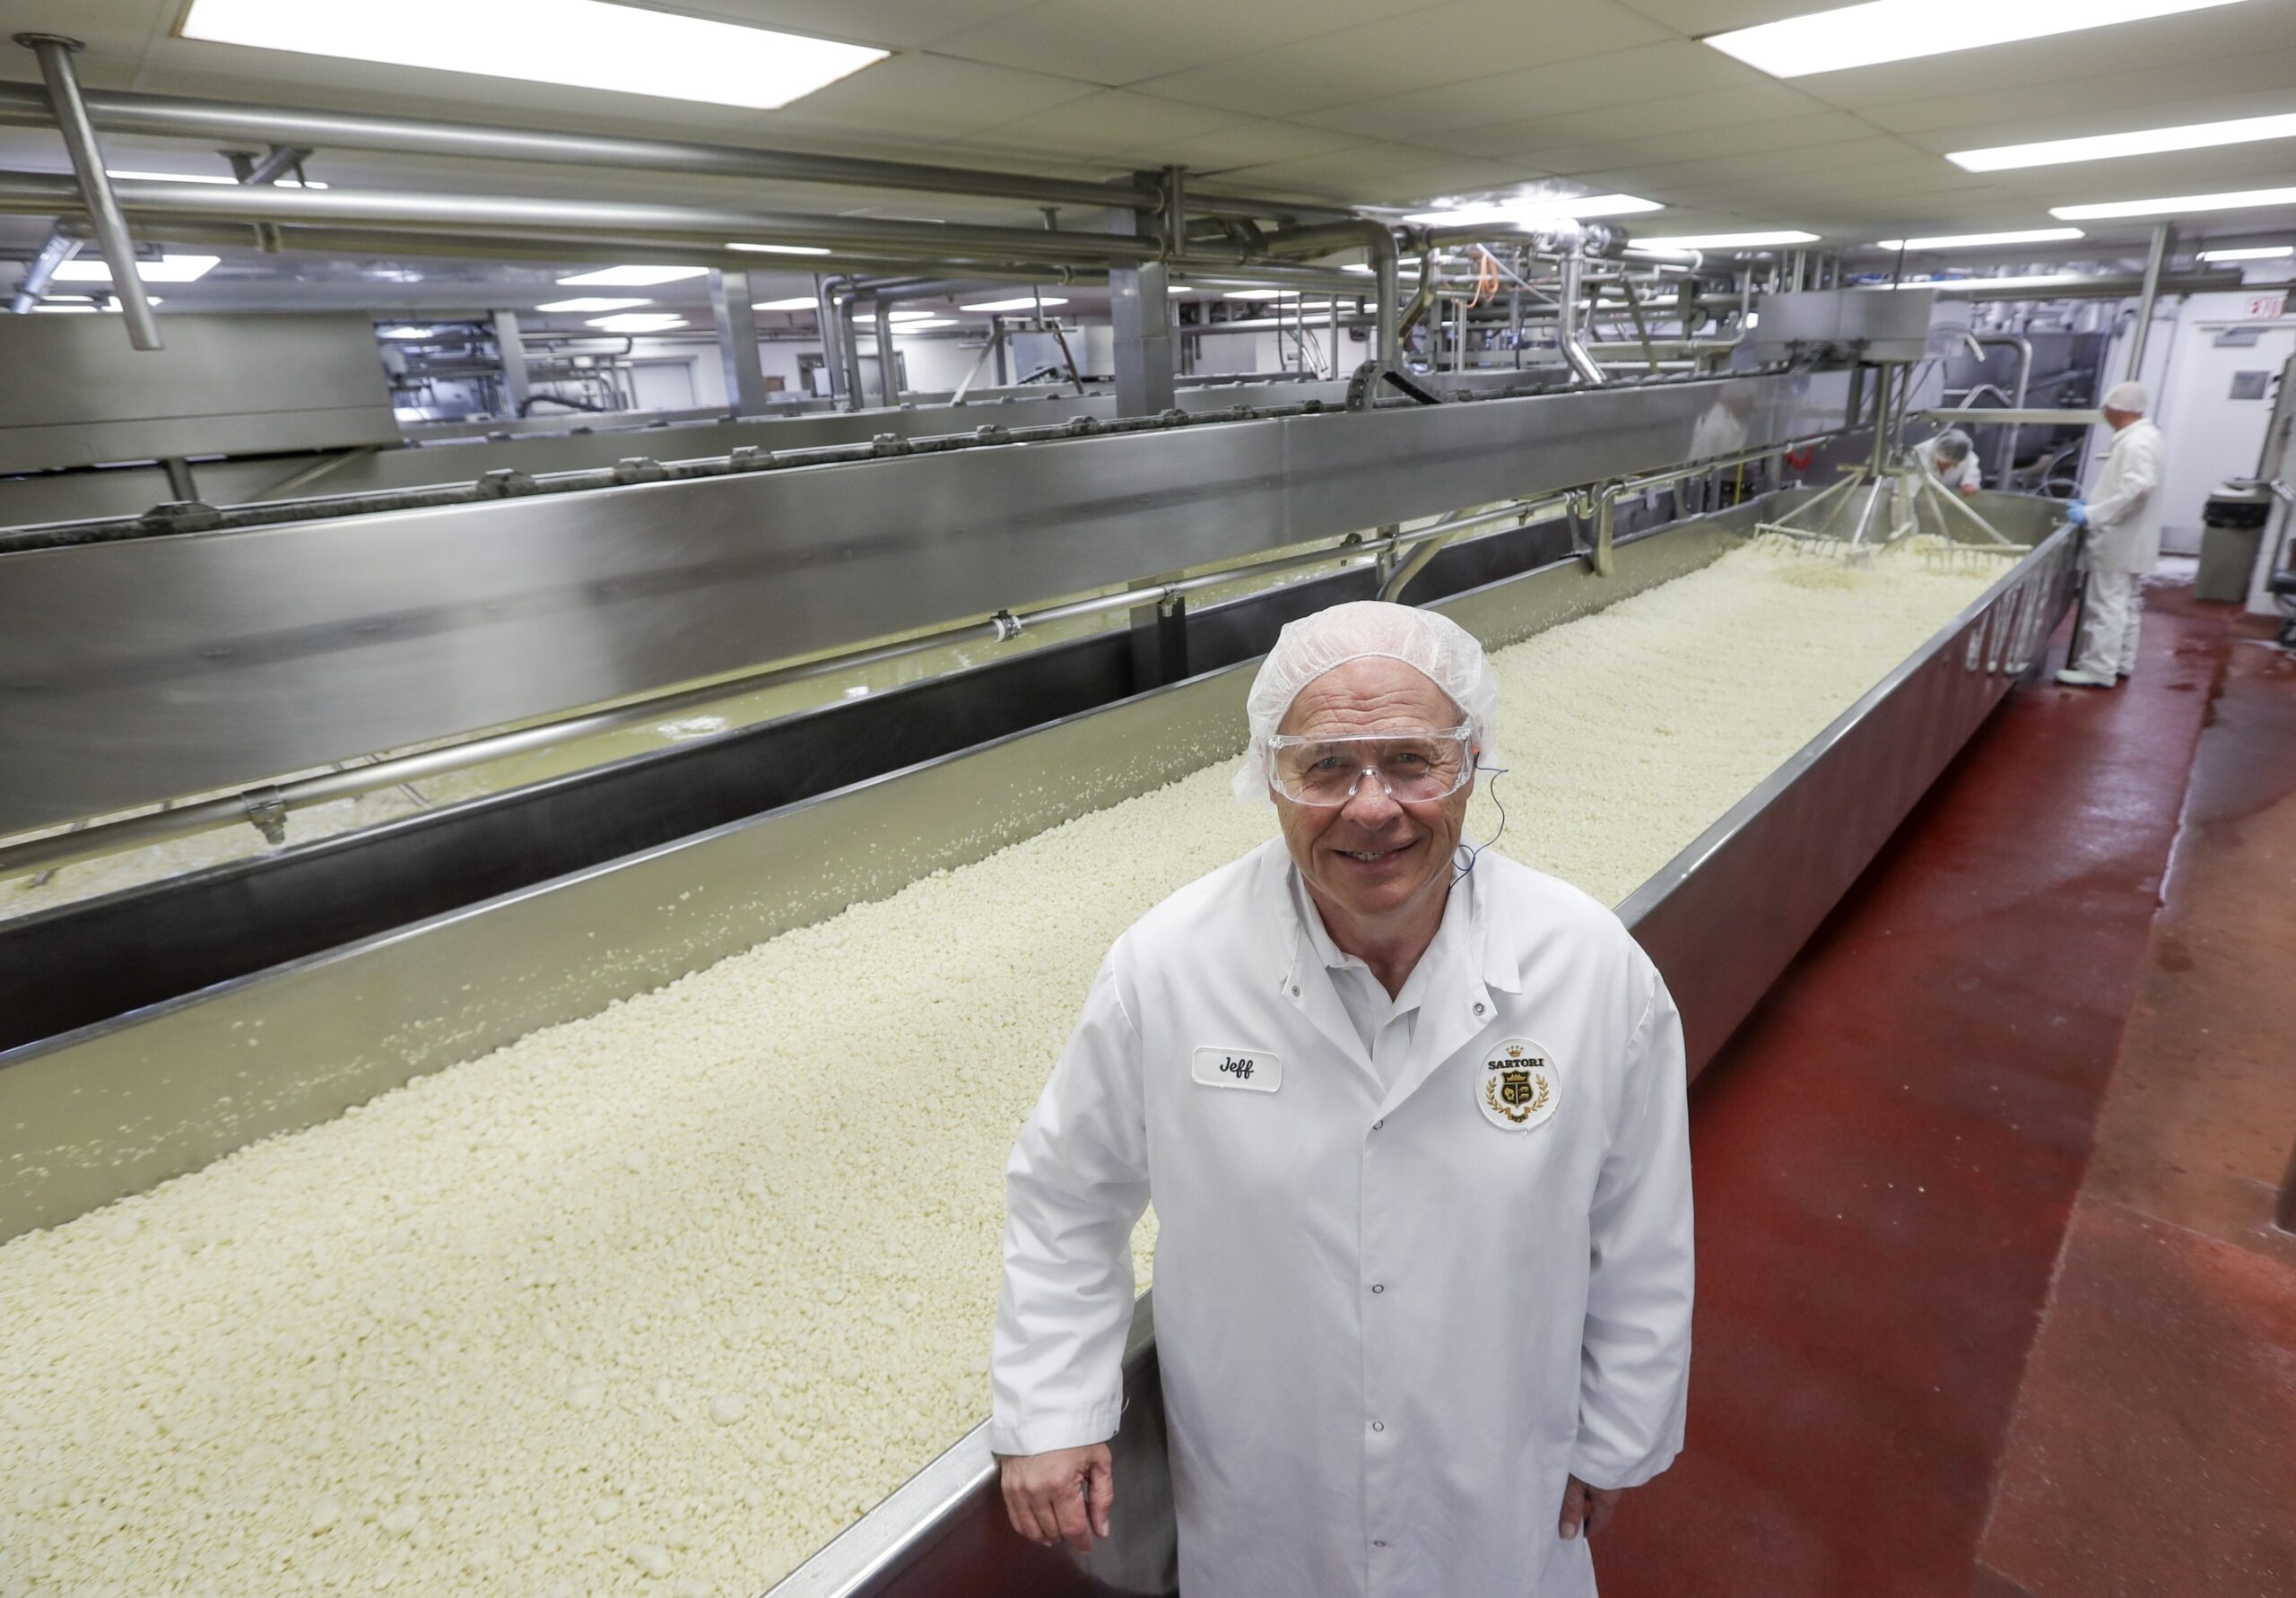 A person standing in front of cheese manufacturing operation